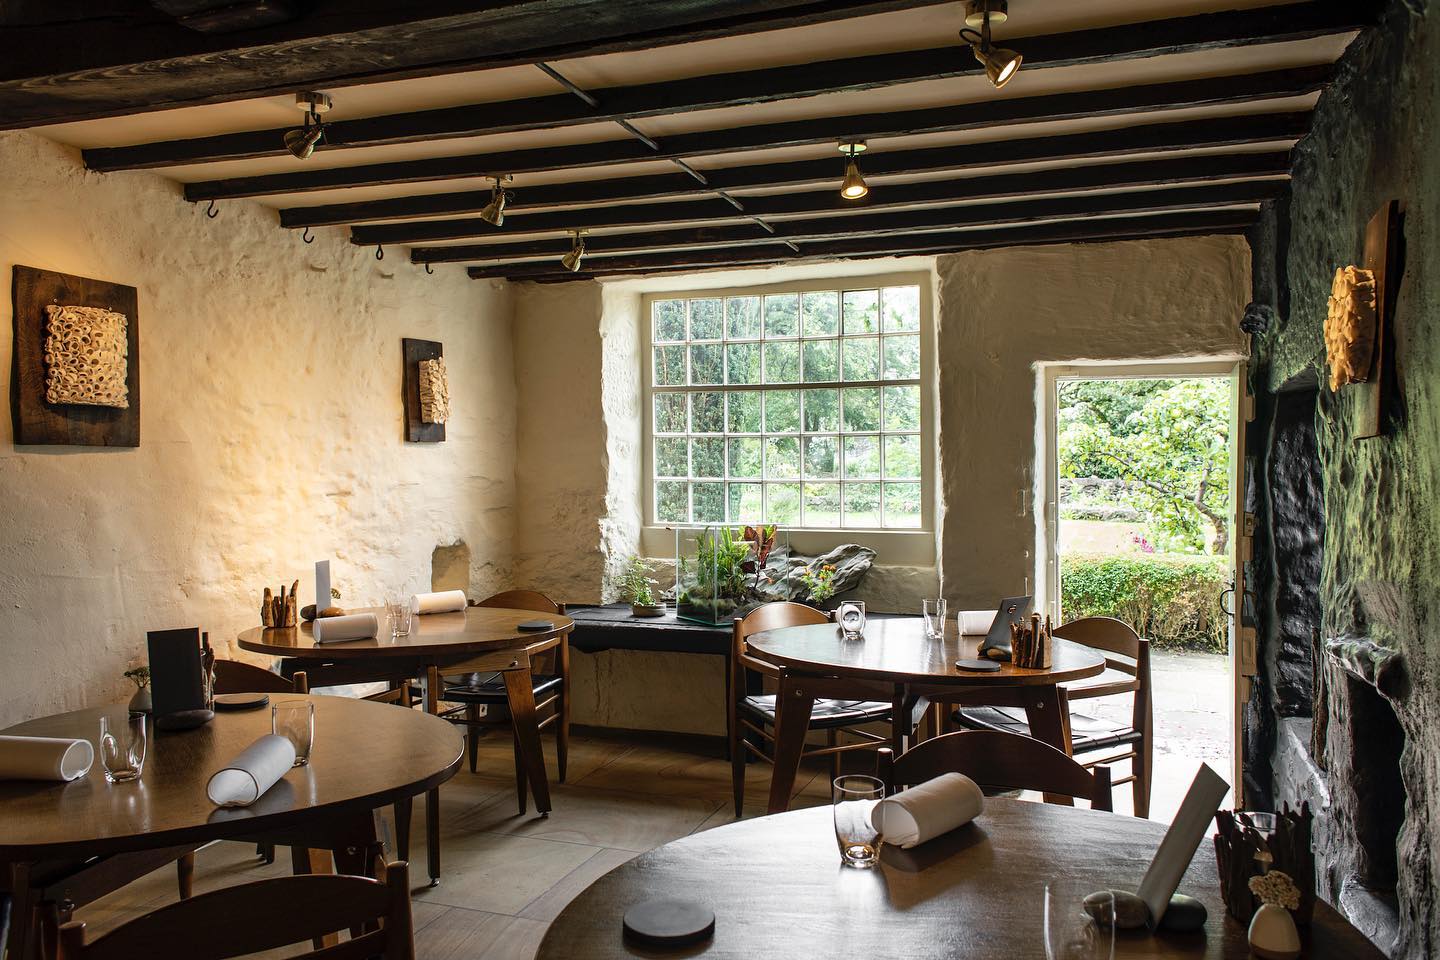 L’Enclume becomes the first restaurant in the north to win three Michelin stars, The Manc